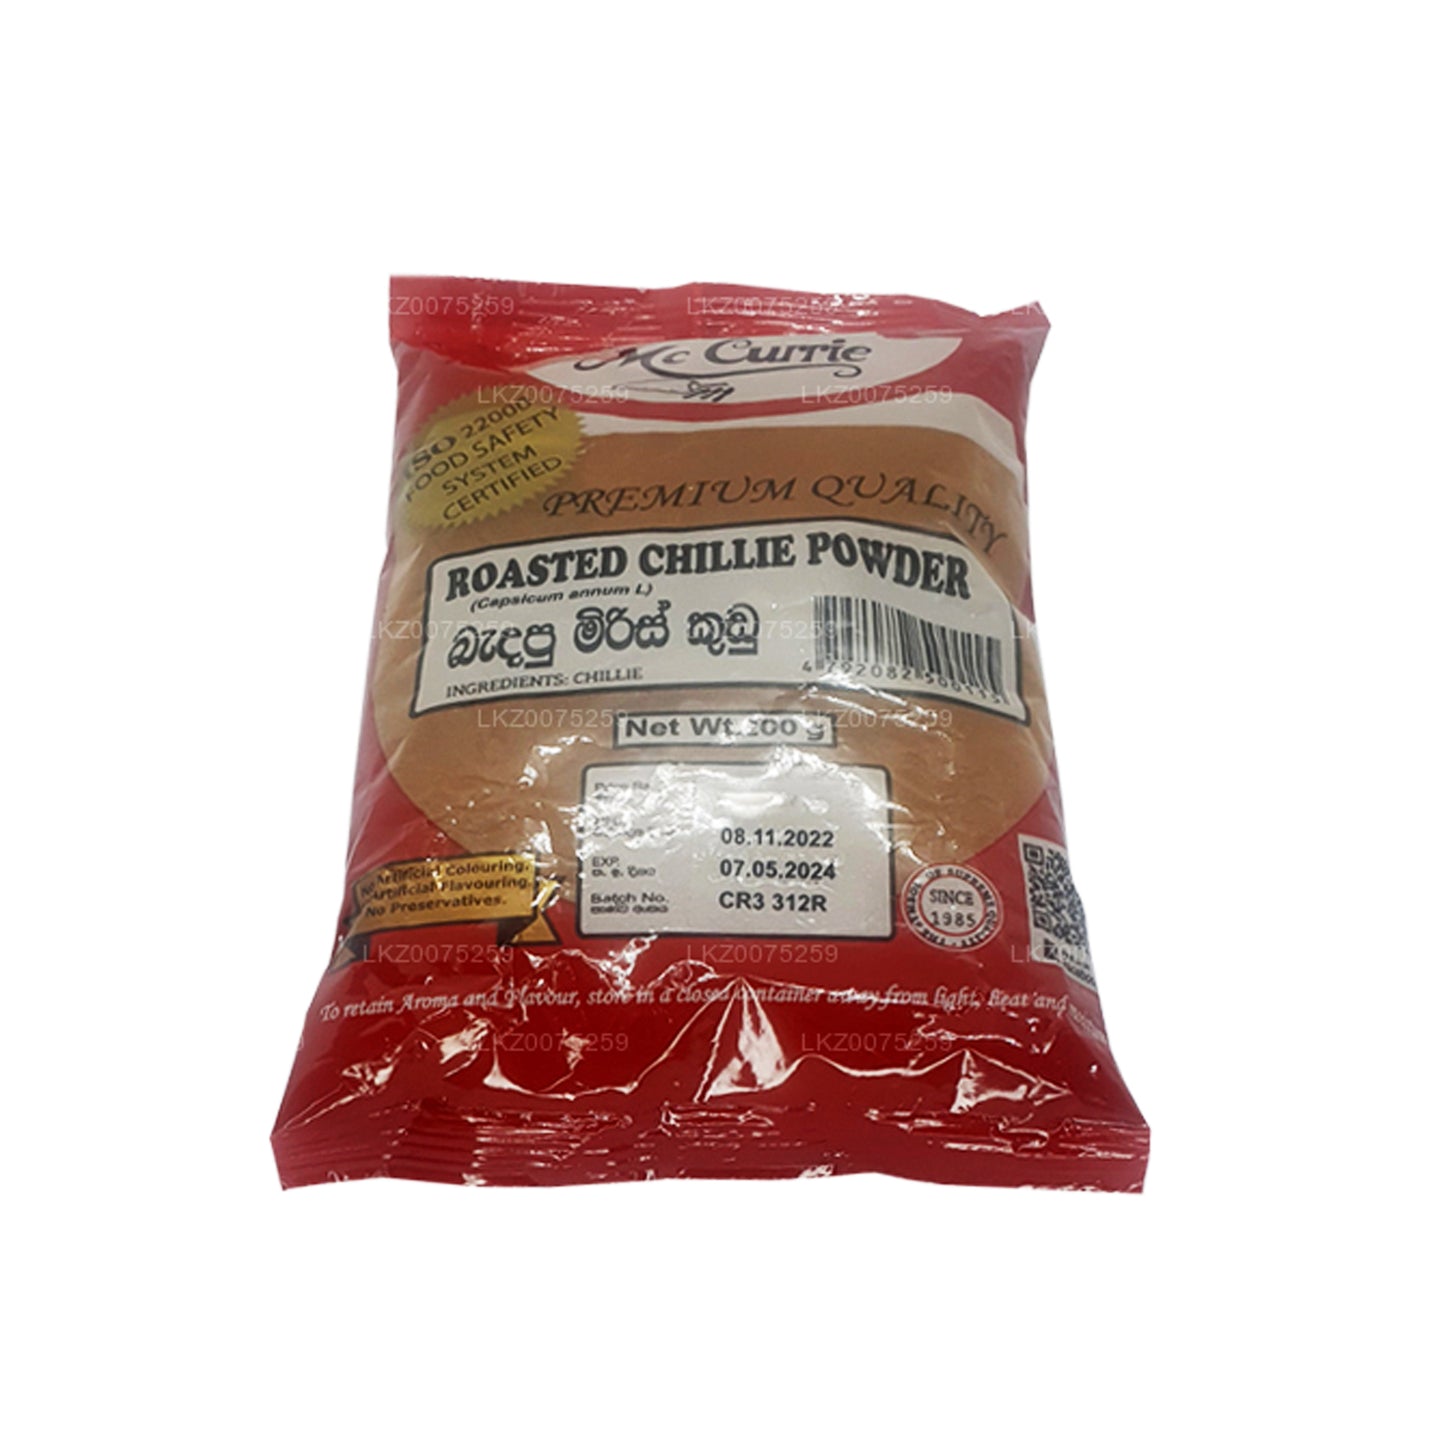 Mc Currie Roasted Chilli Powder (200g)